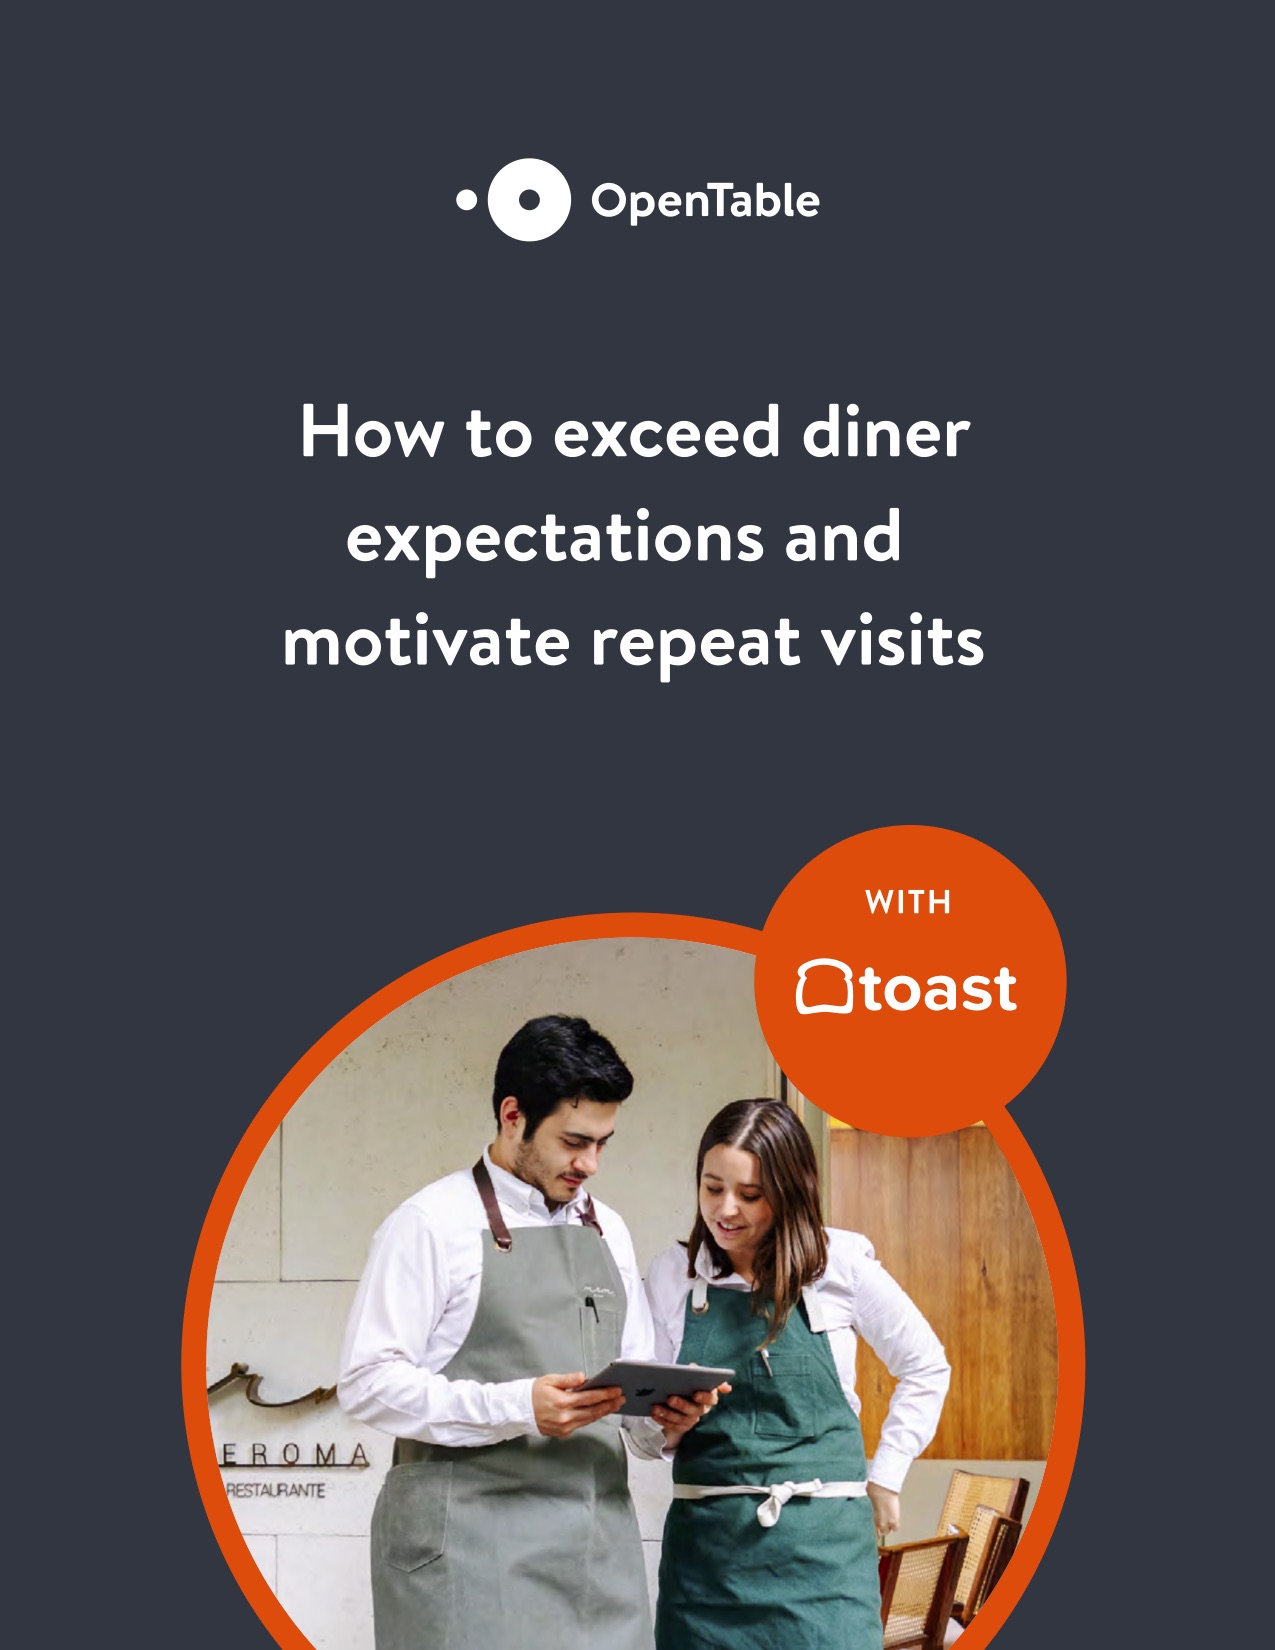 OpenTable and Upserve partnership increases personalization